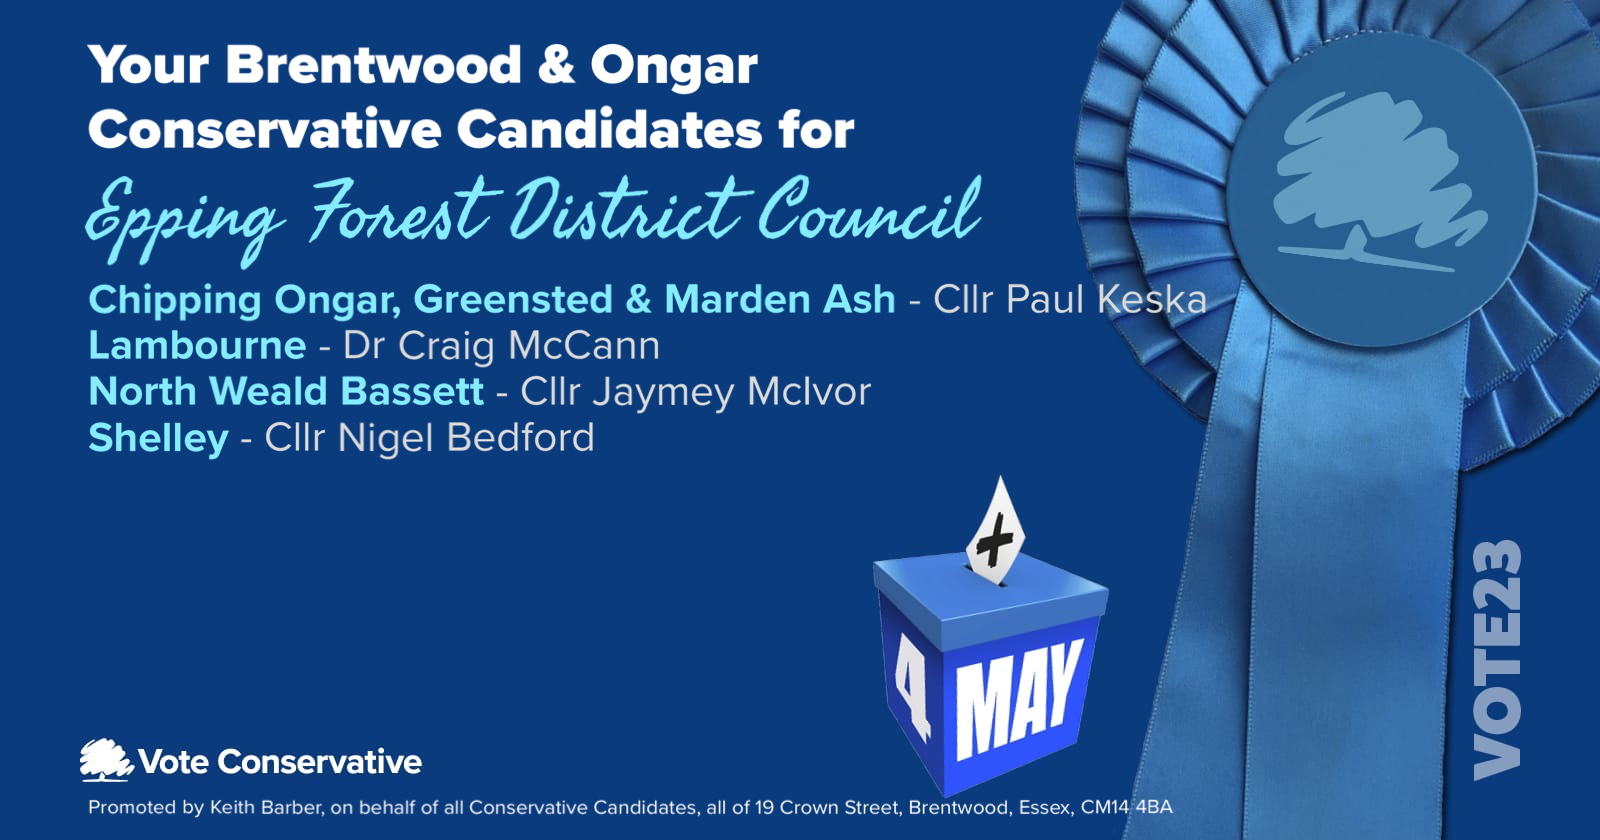 Epping Forest District Council Candidates